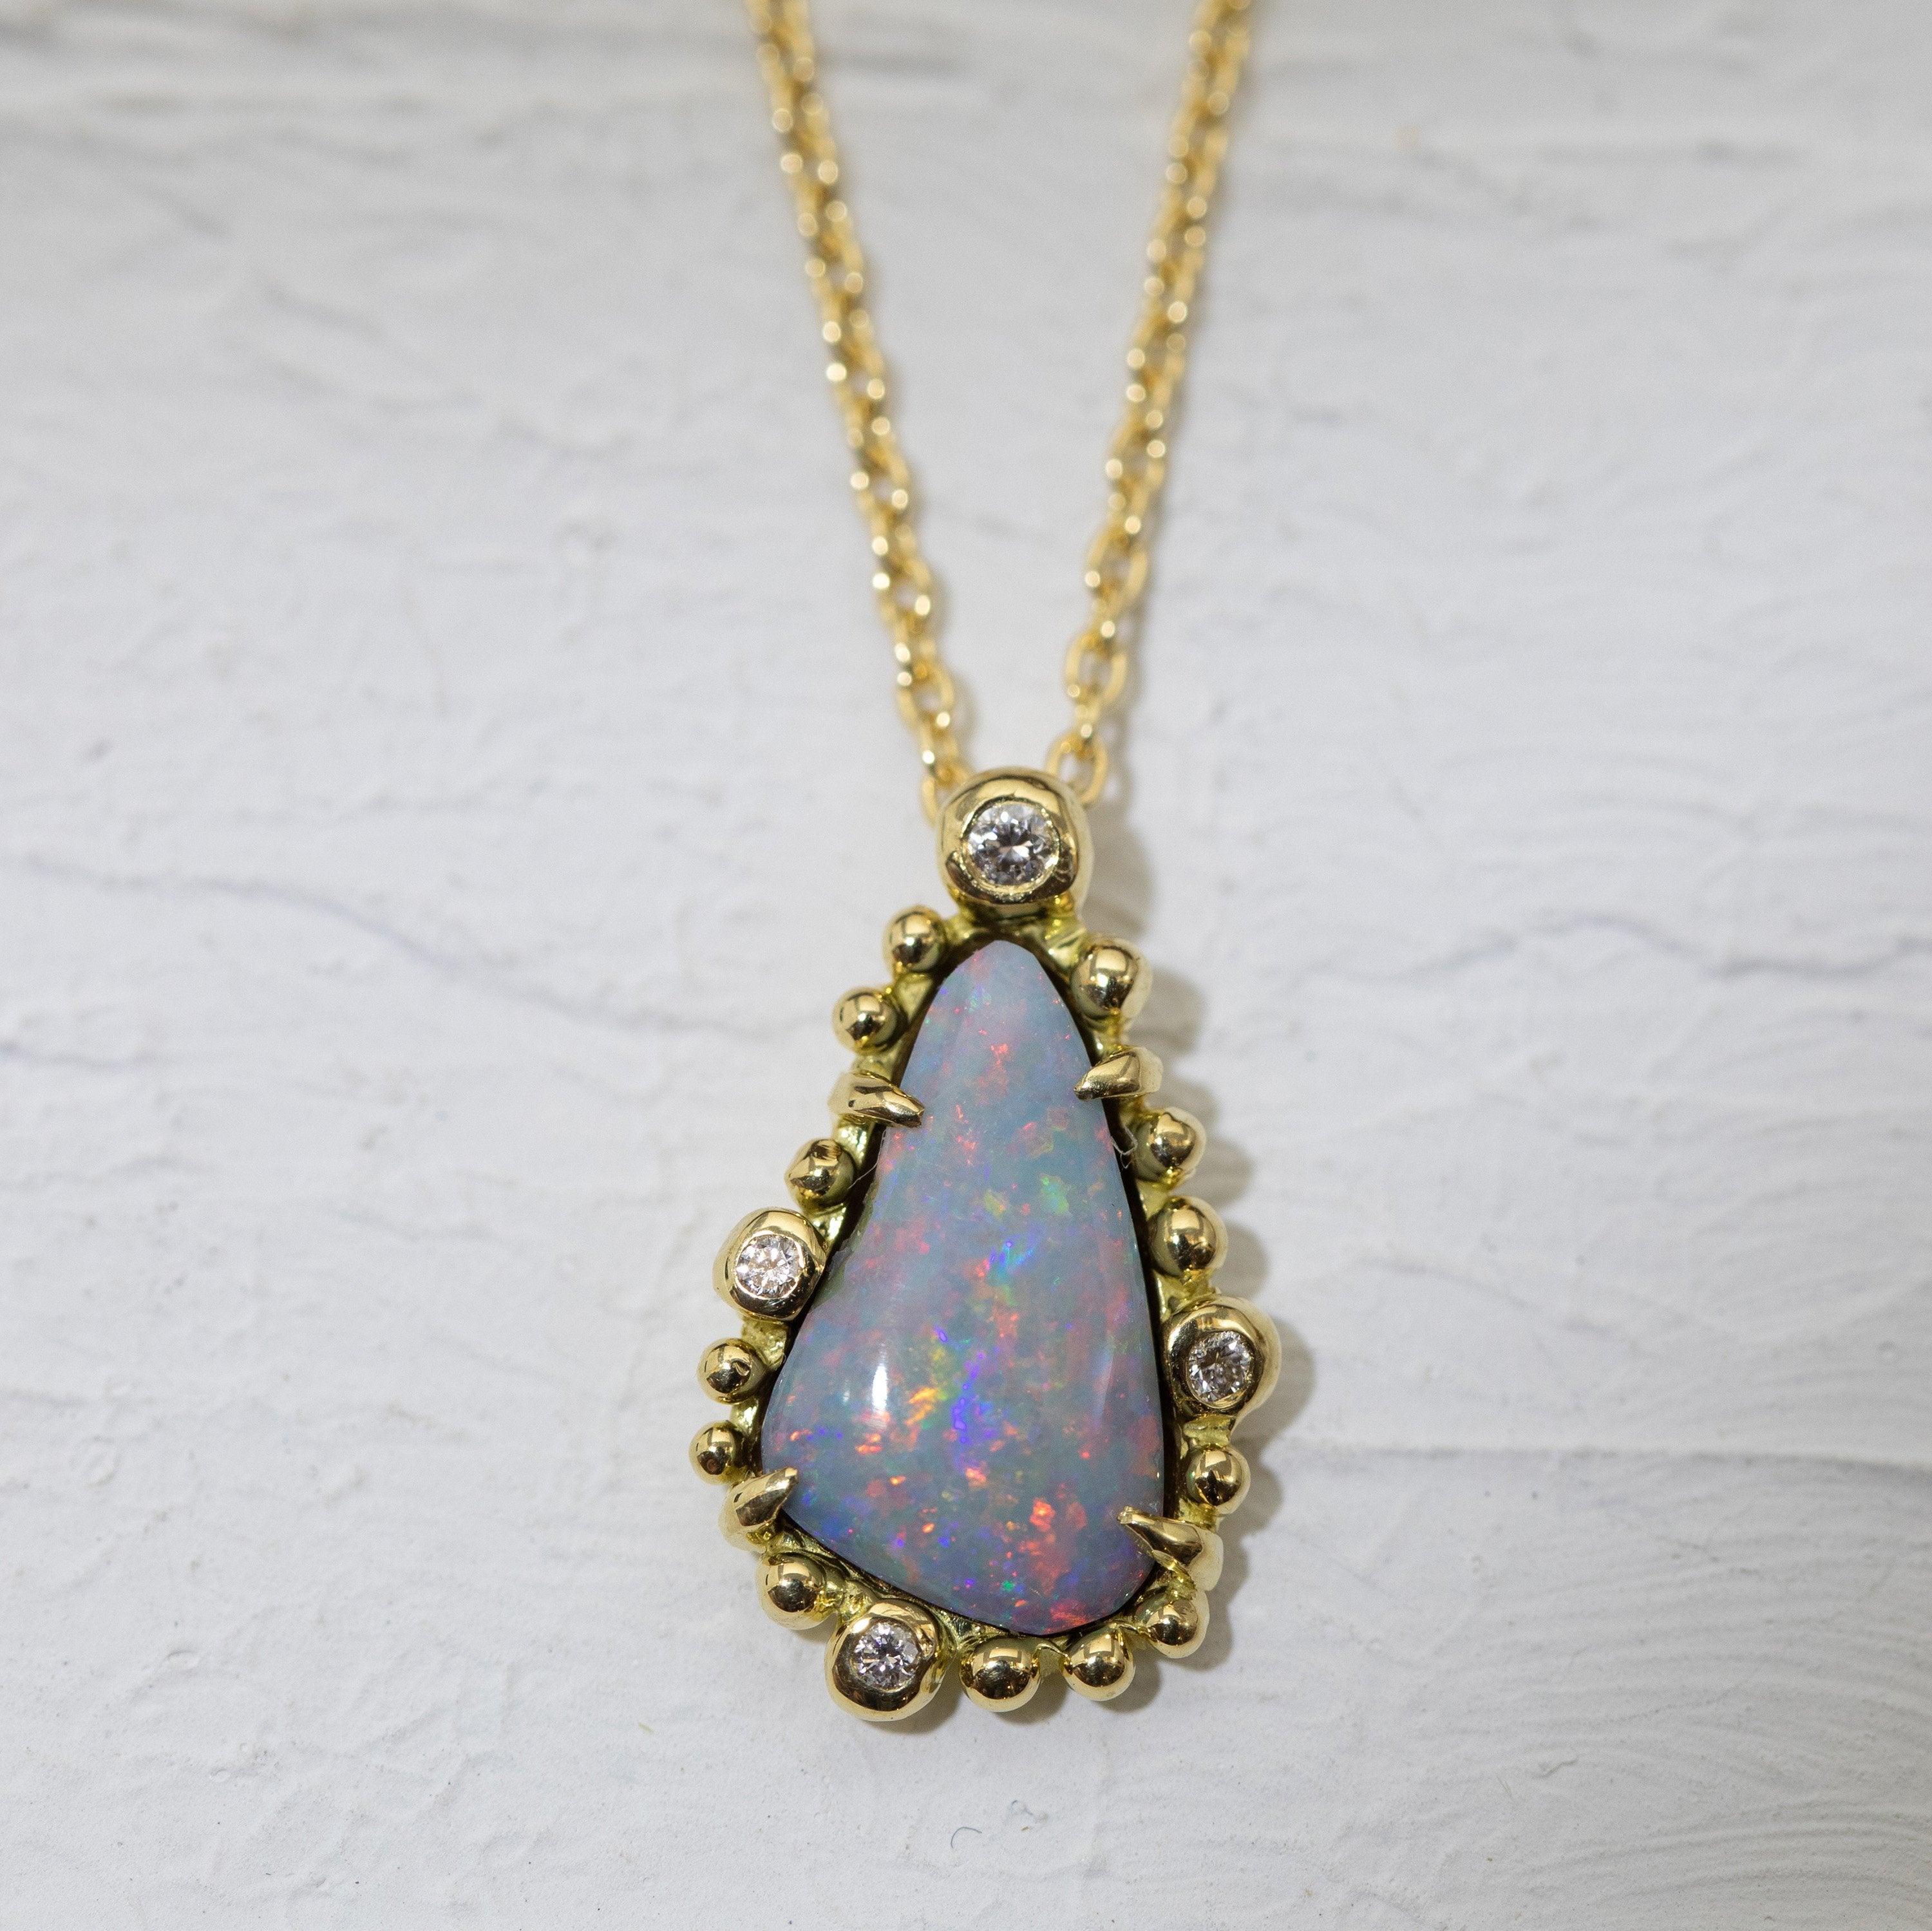 White Rainbow Opal Necklace with Dots and Diamonds (18k)